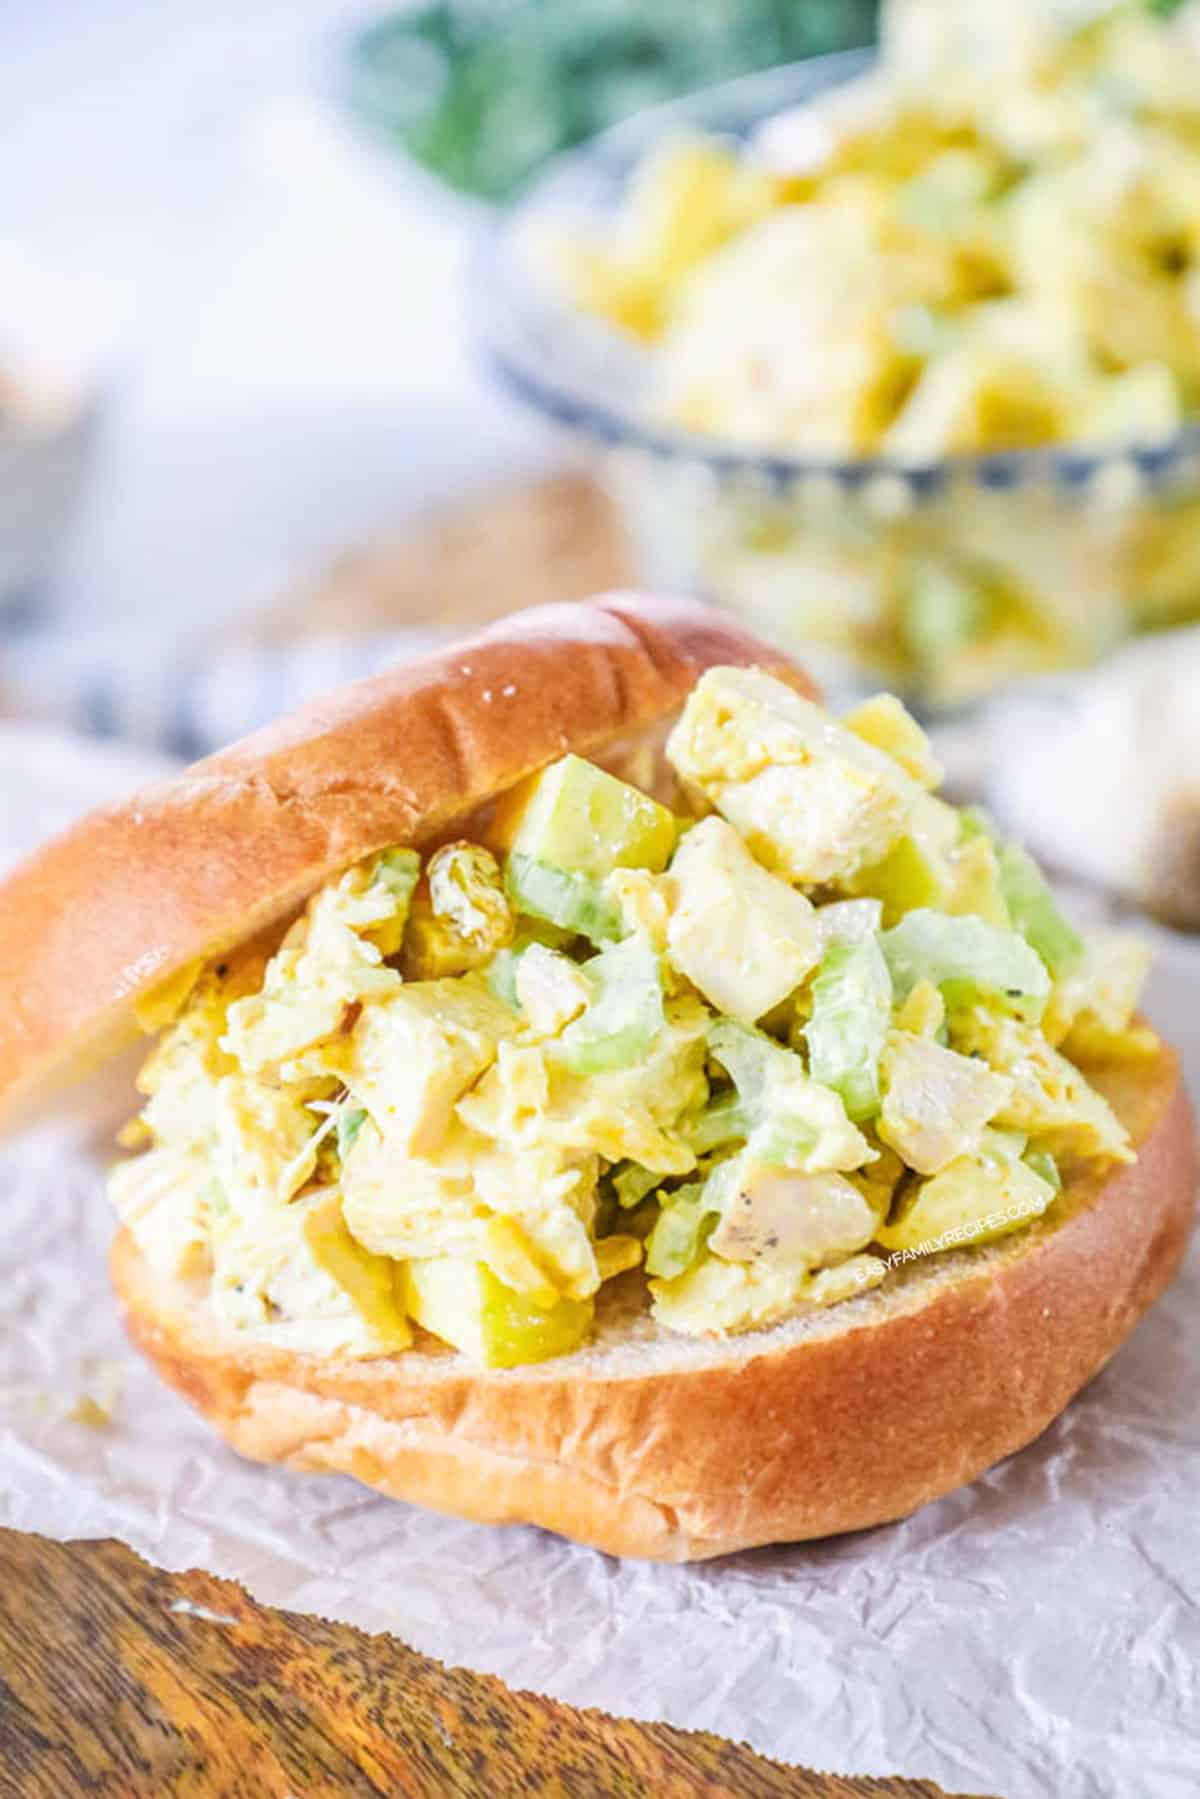 Curry chicken salad served on a bakery bun.